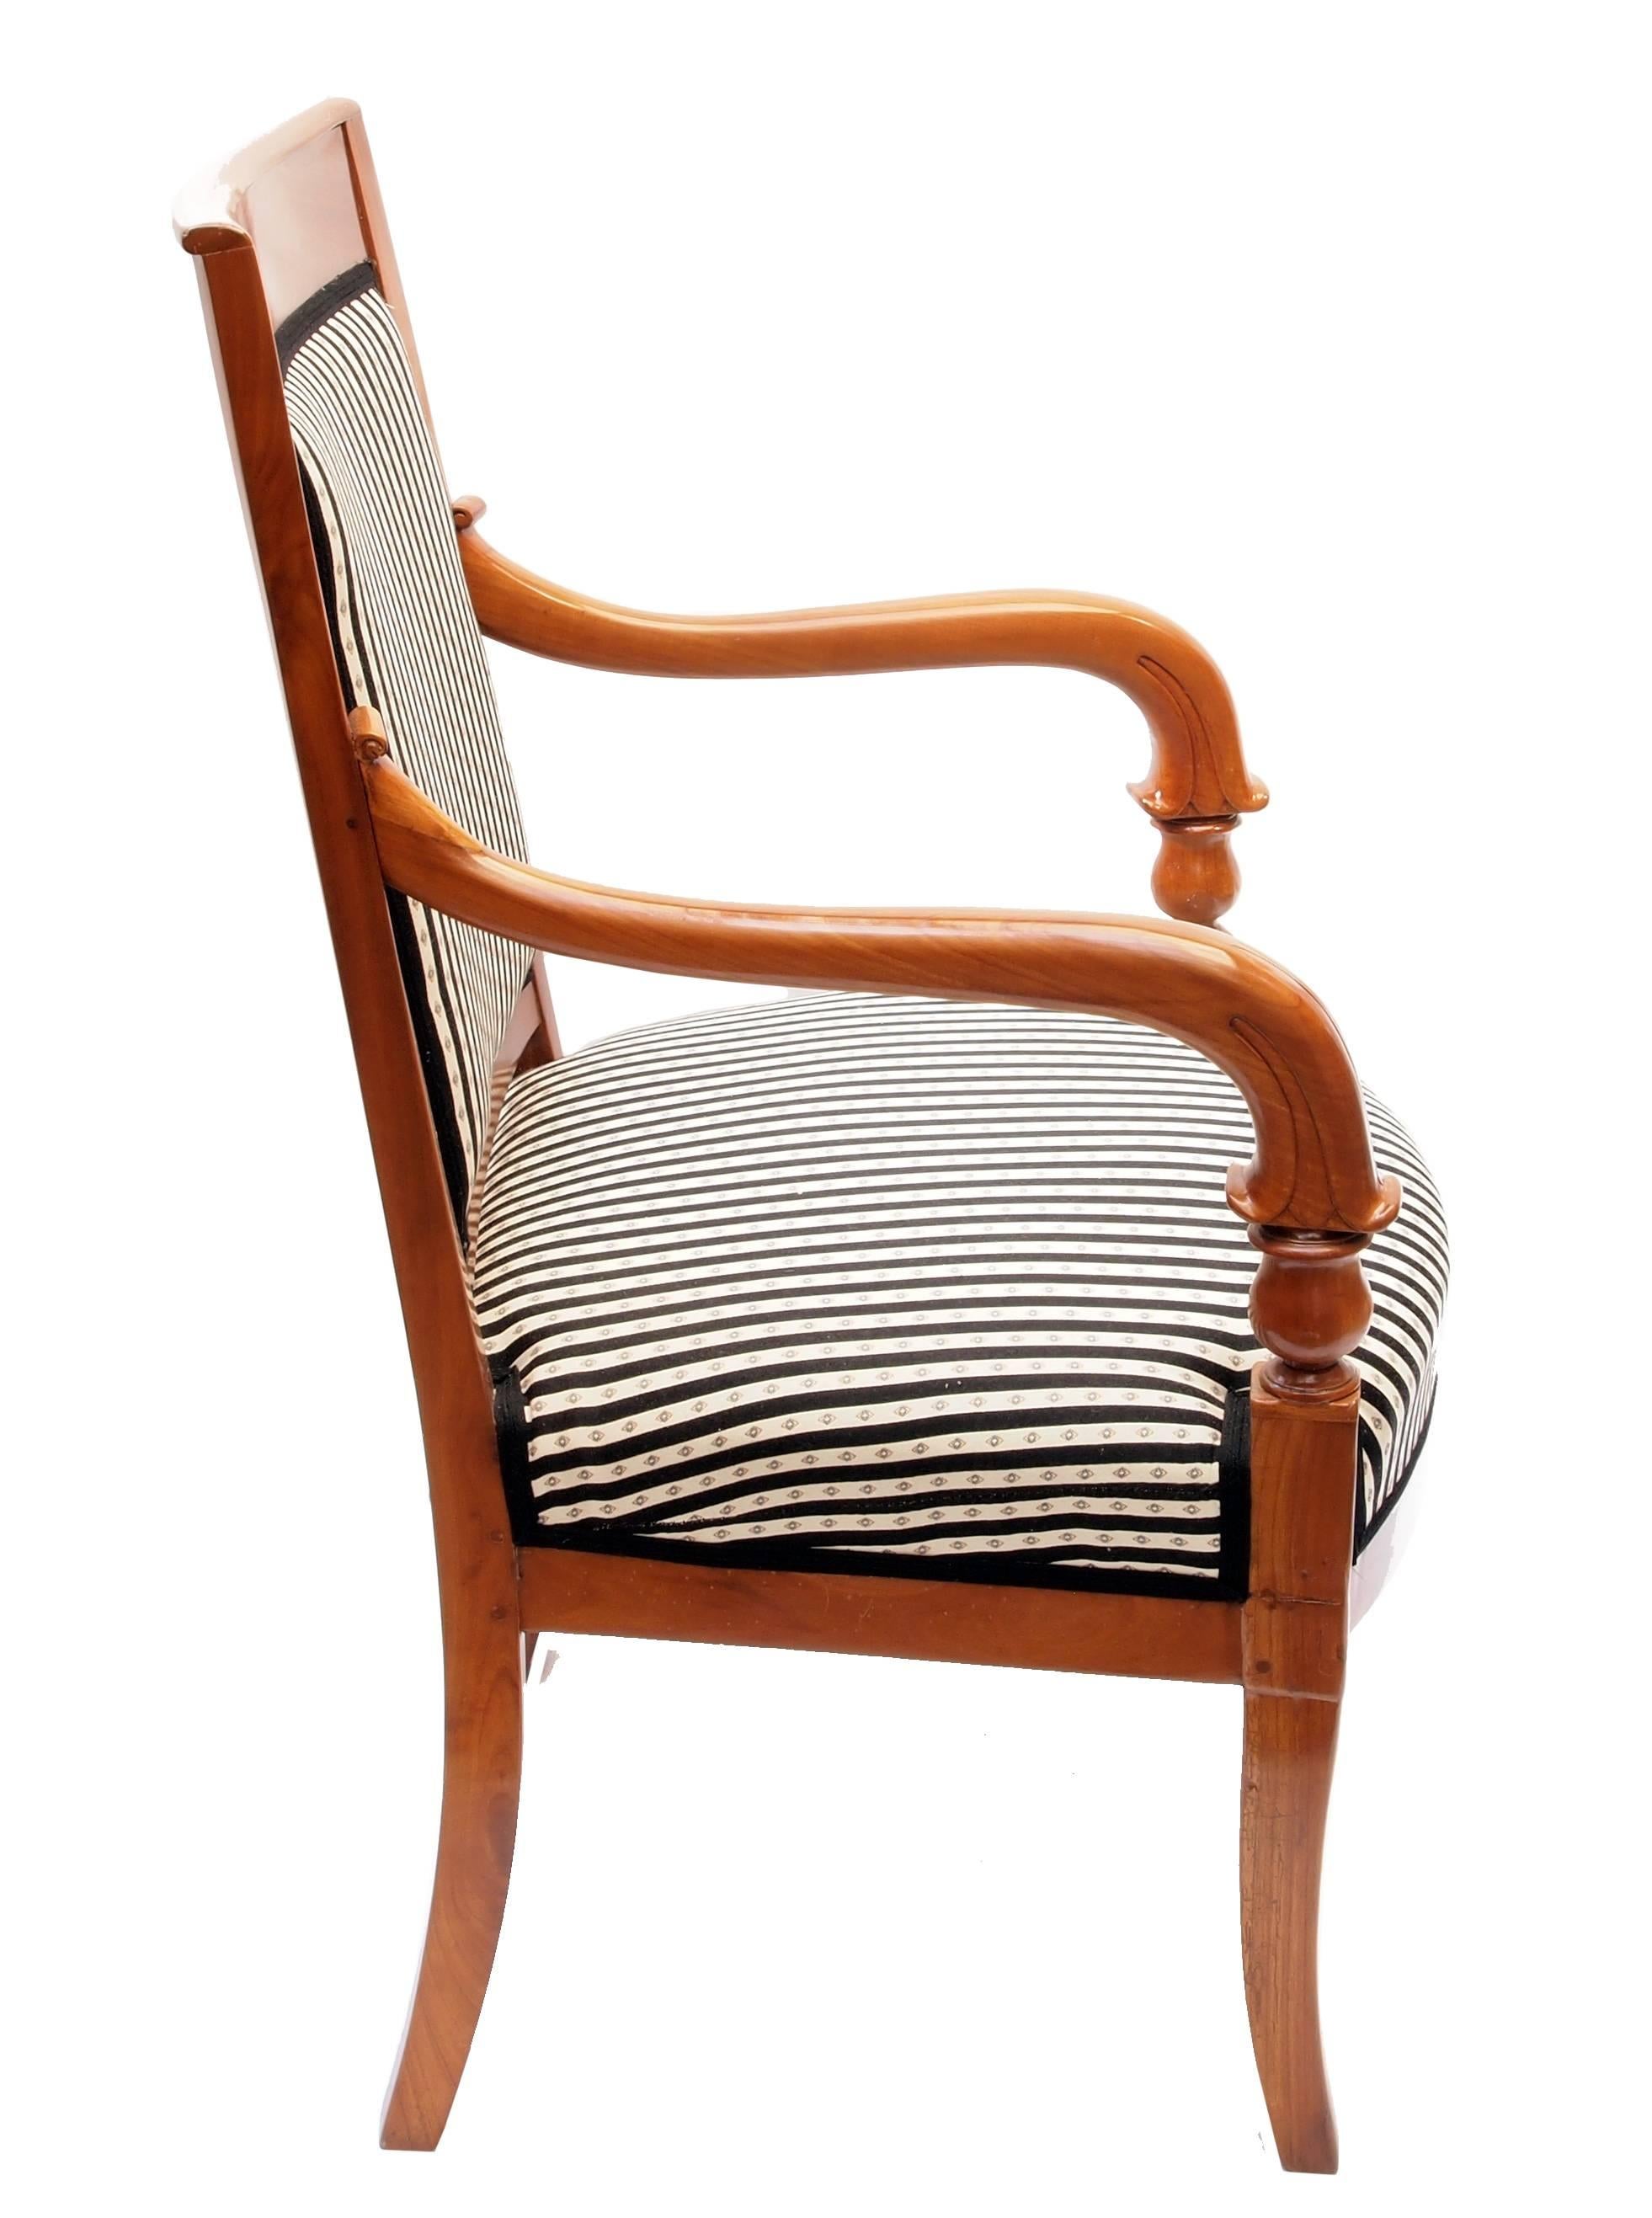 Beautiful Biedermeier armchair from south Germany, very good restorated condition. Solid cherrywood and completely new upholstered.

Measures: Seat height 45 cm.